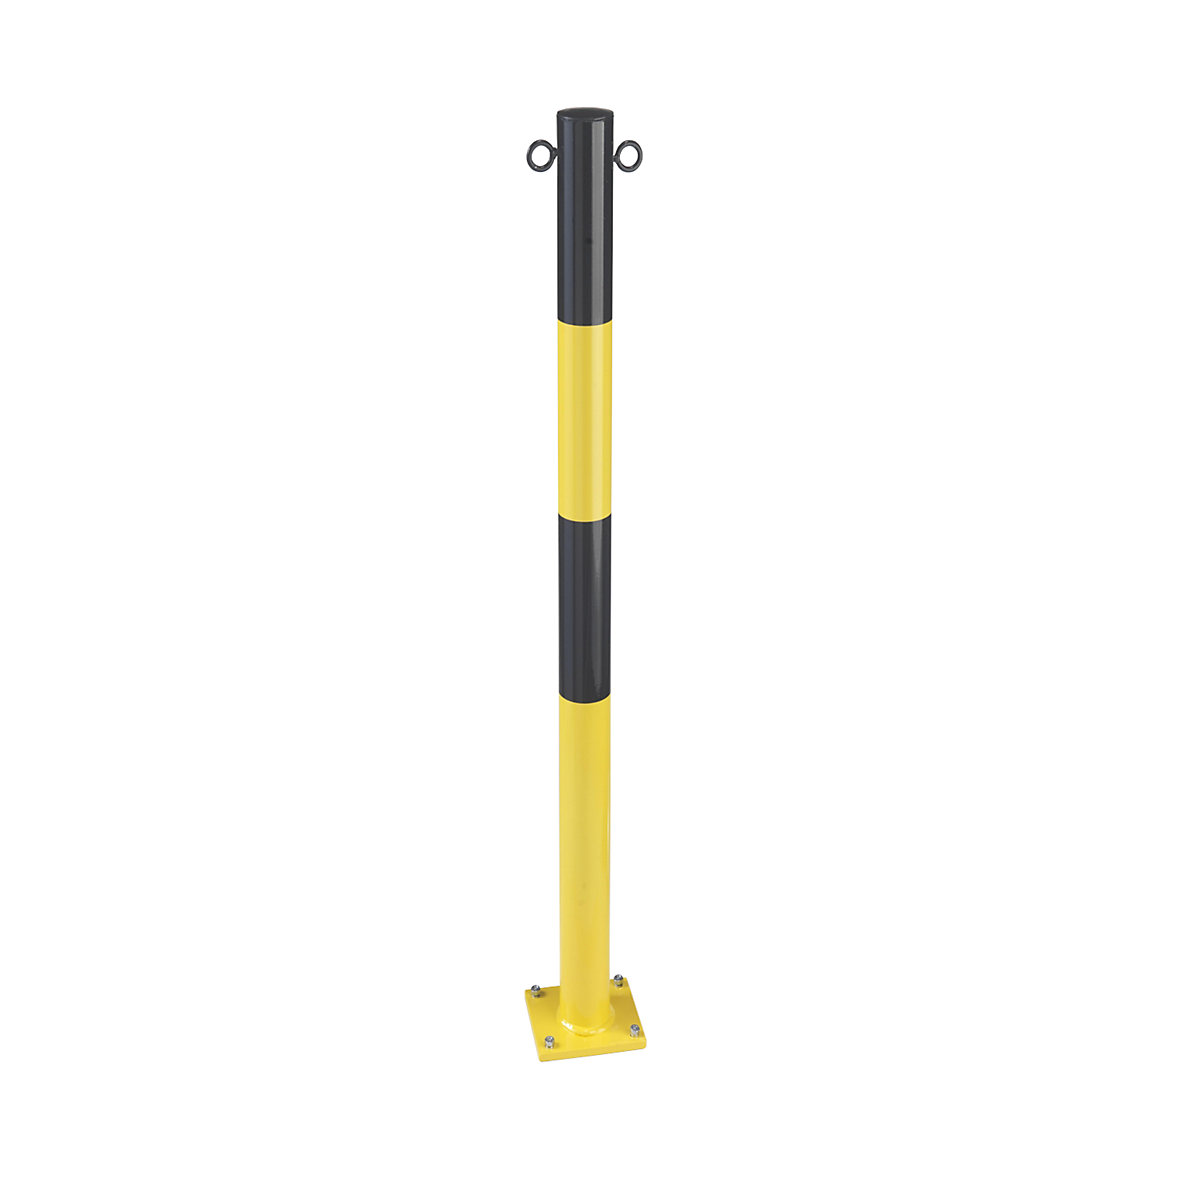 Barrier post made of tubular steel, for bolting in place, Ø 60 mm, yellow / black, zinc plated and painted-3